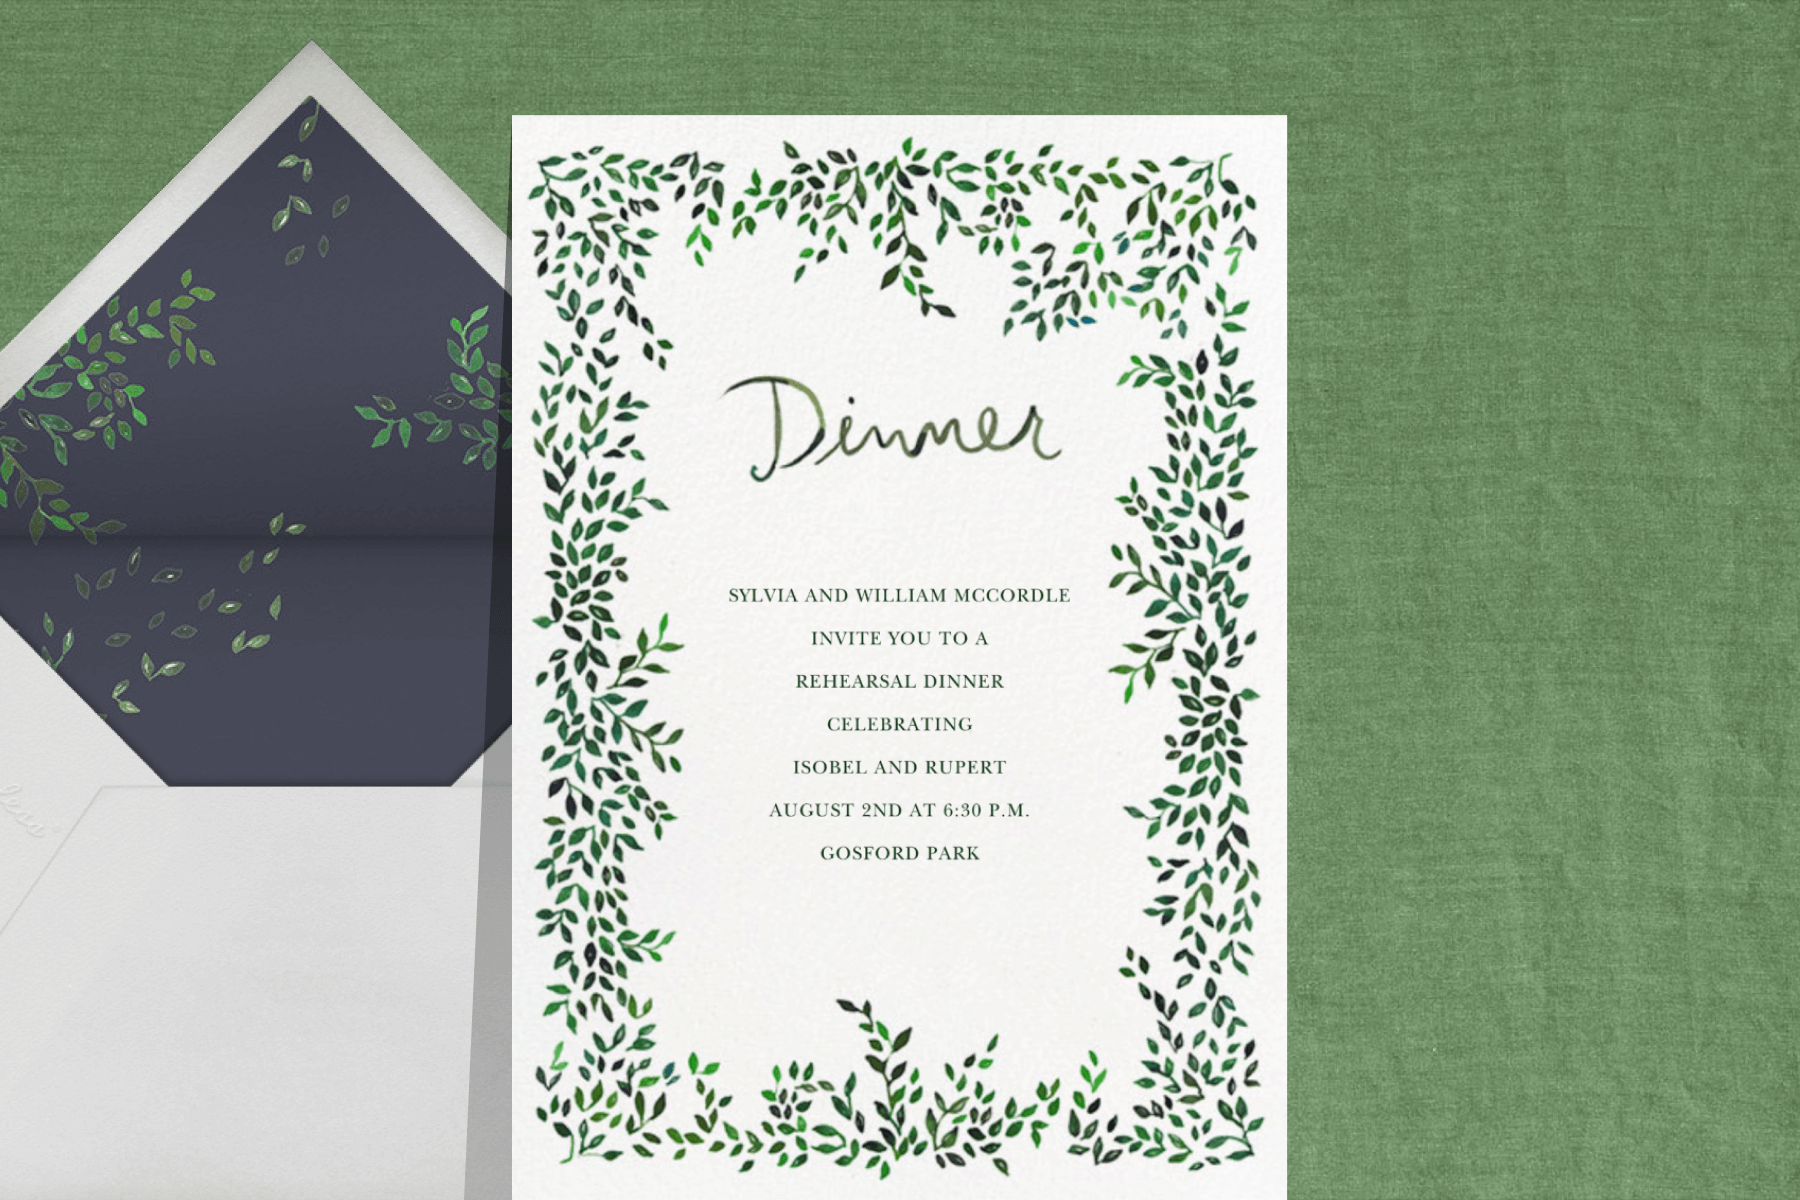 A rehearsal dinner invitation with “Dinner” in script handwriting and greenery on the border.